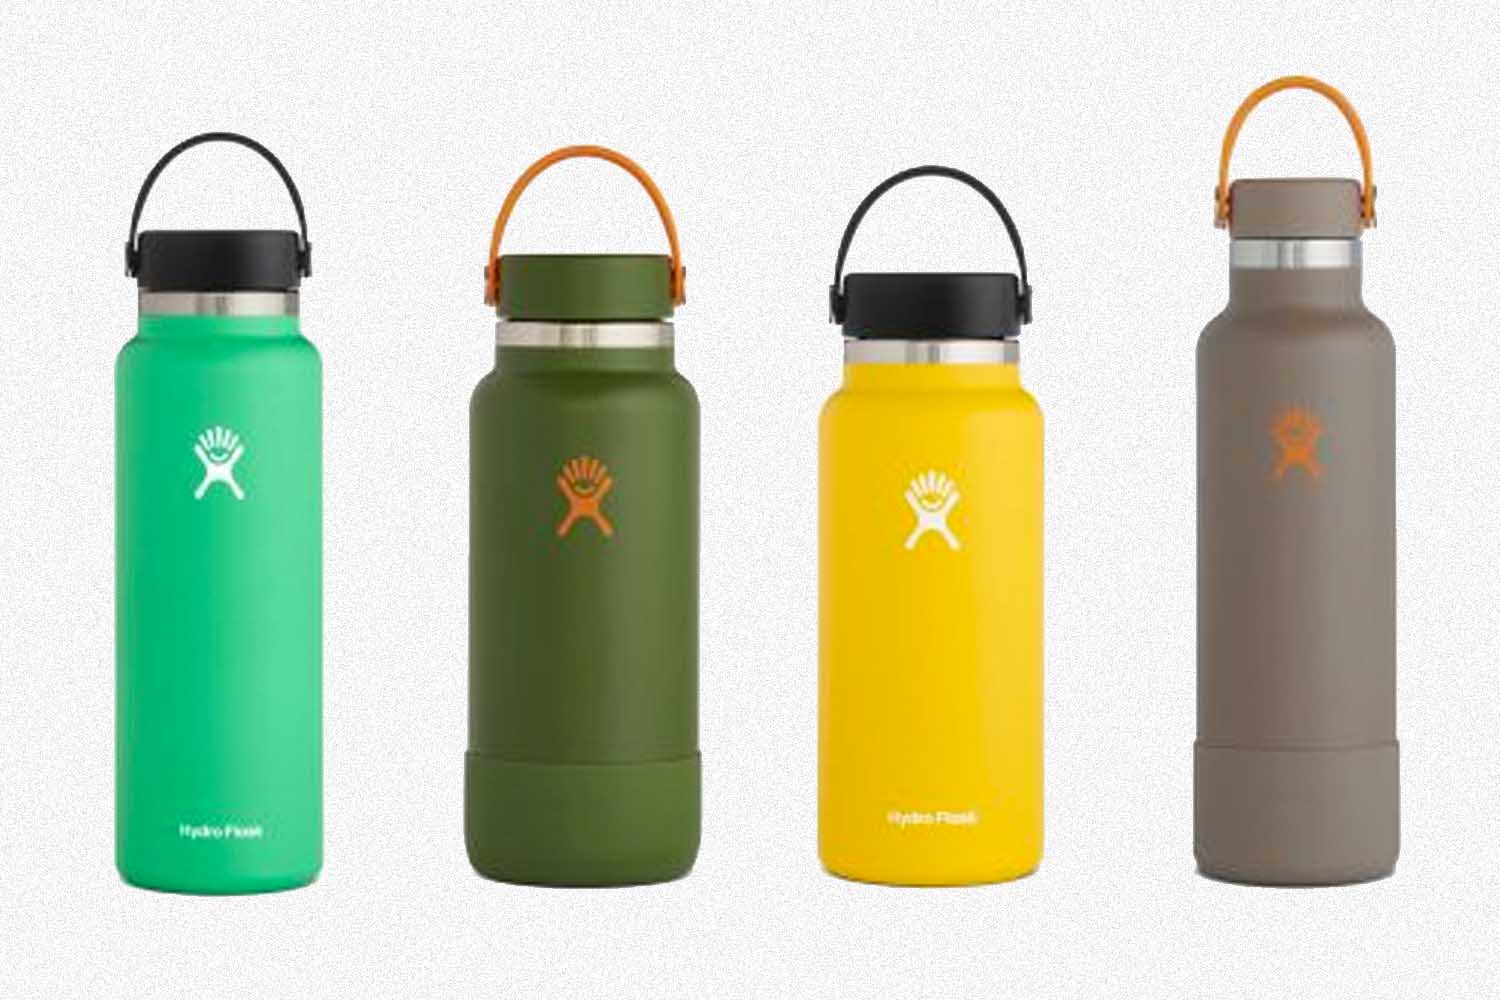 Hydro Flask bottles in green, yellow and brown